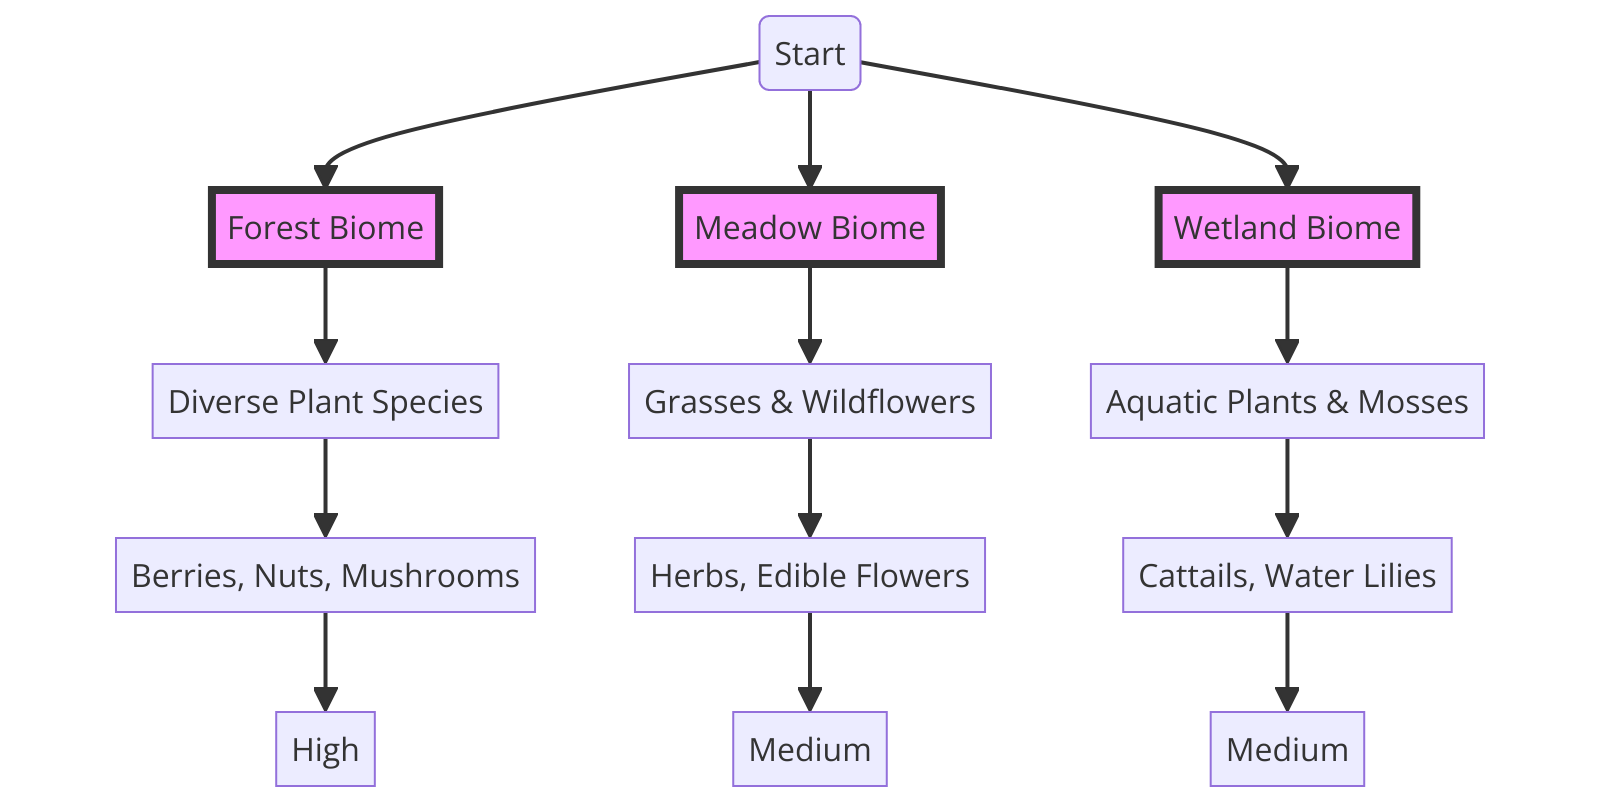 the steps for finding great foraging spots across different biomes (forest, meadow, wetland)